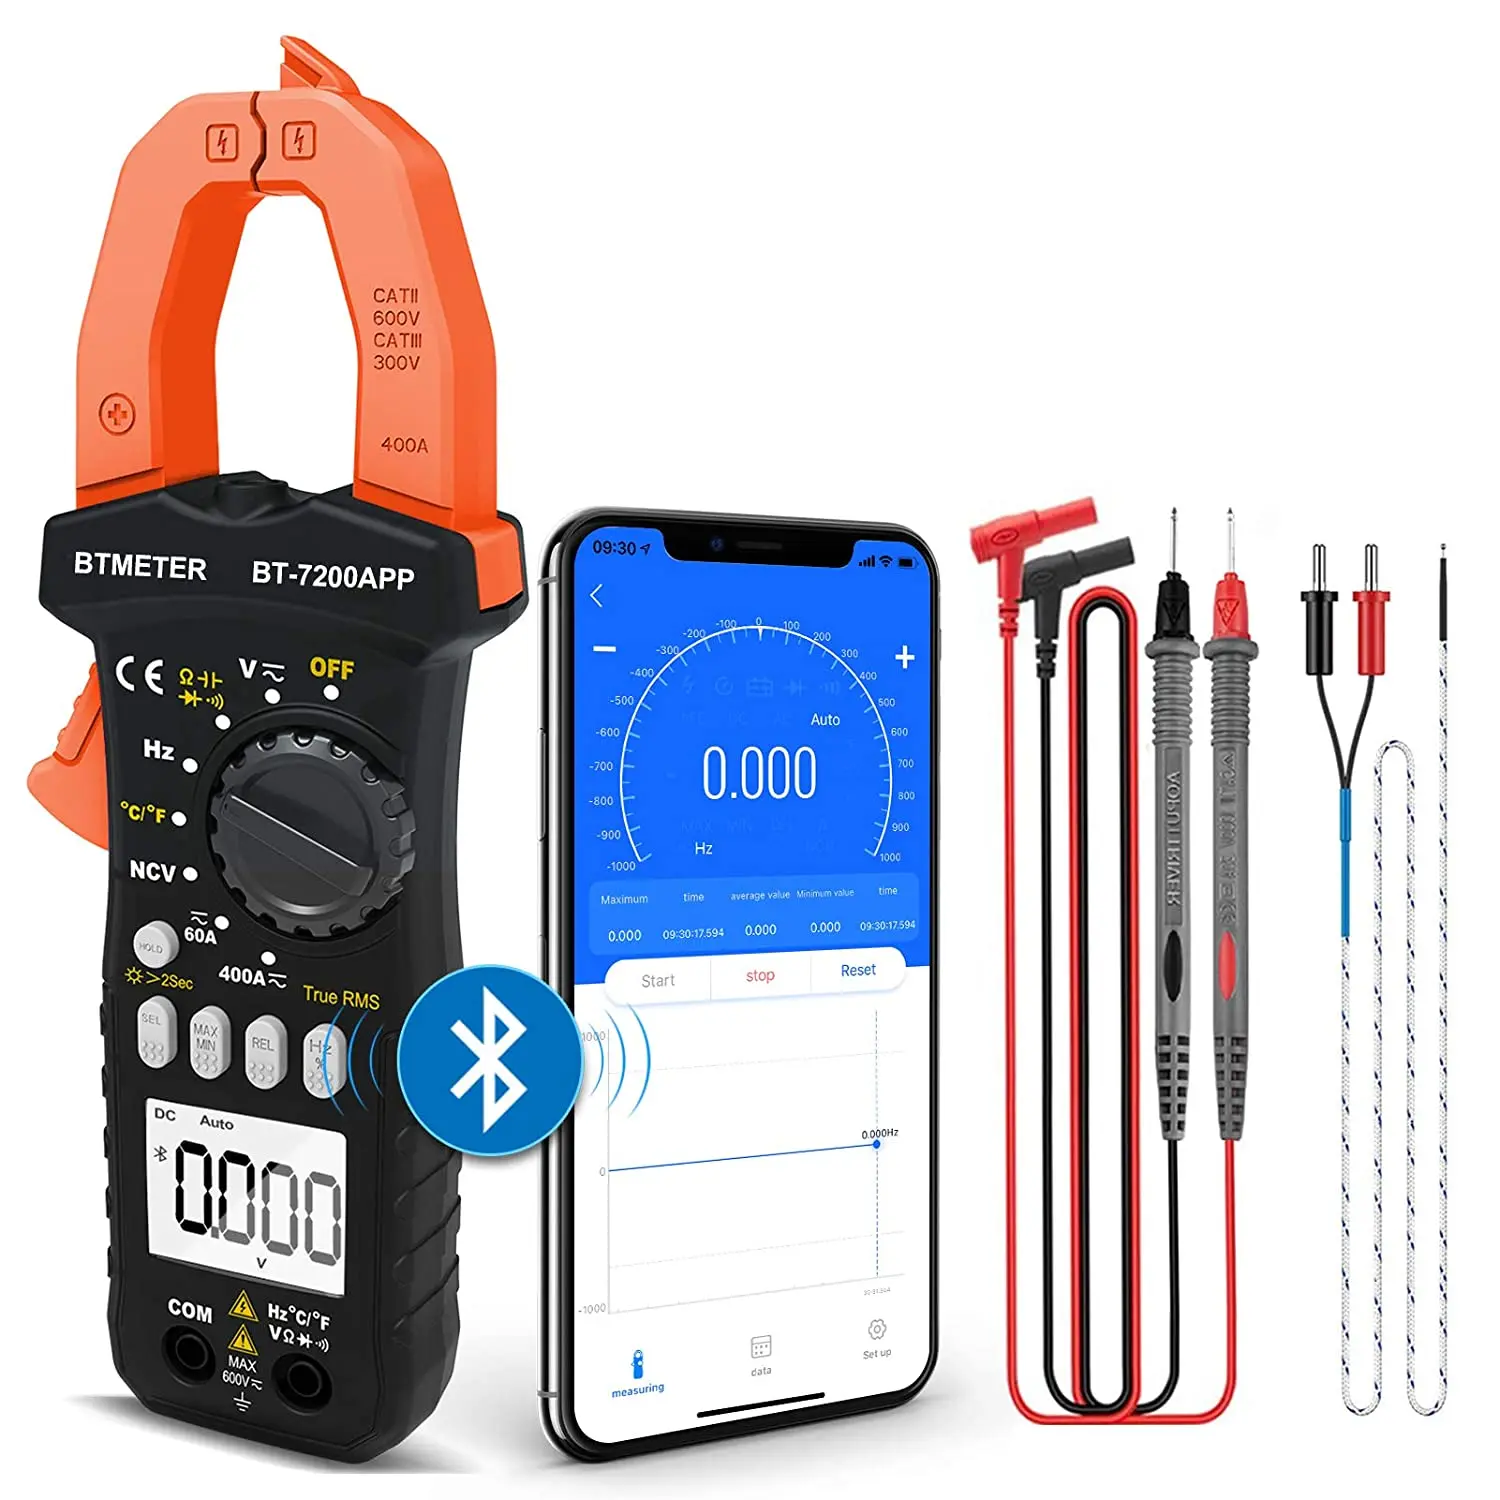 BT-7200APP TRMS 6000 Counting Clamp Multimeter, Bluetooth Clamp Ammeter for AC/DC Current Voltage Resistor Capacitor Frequency